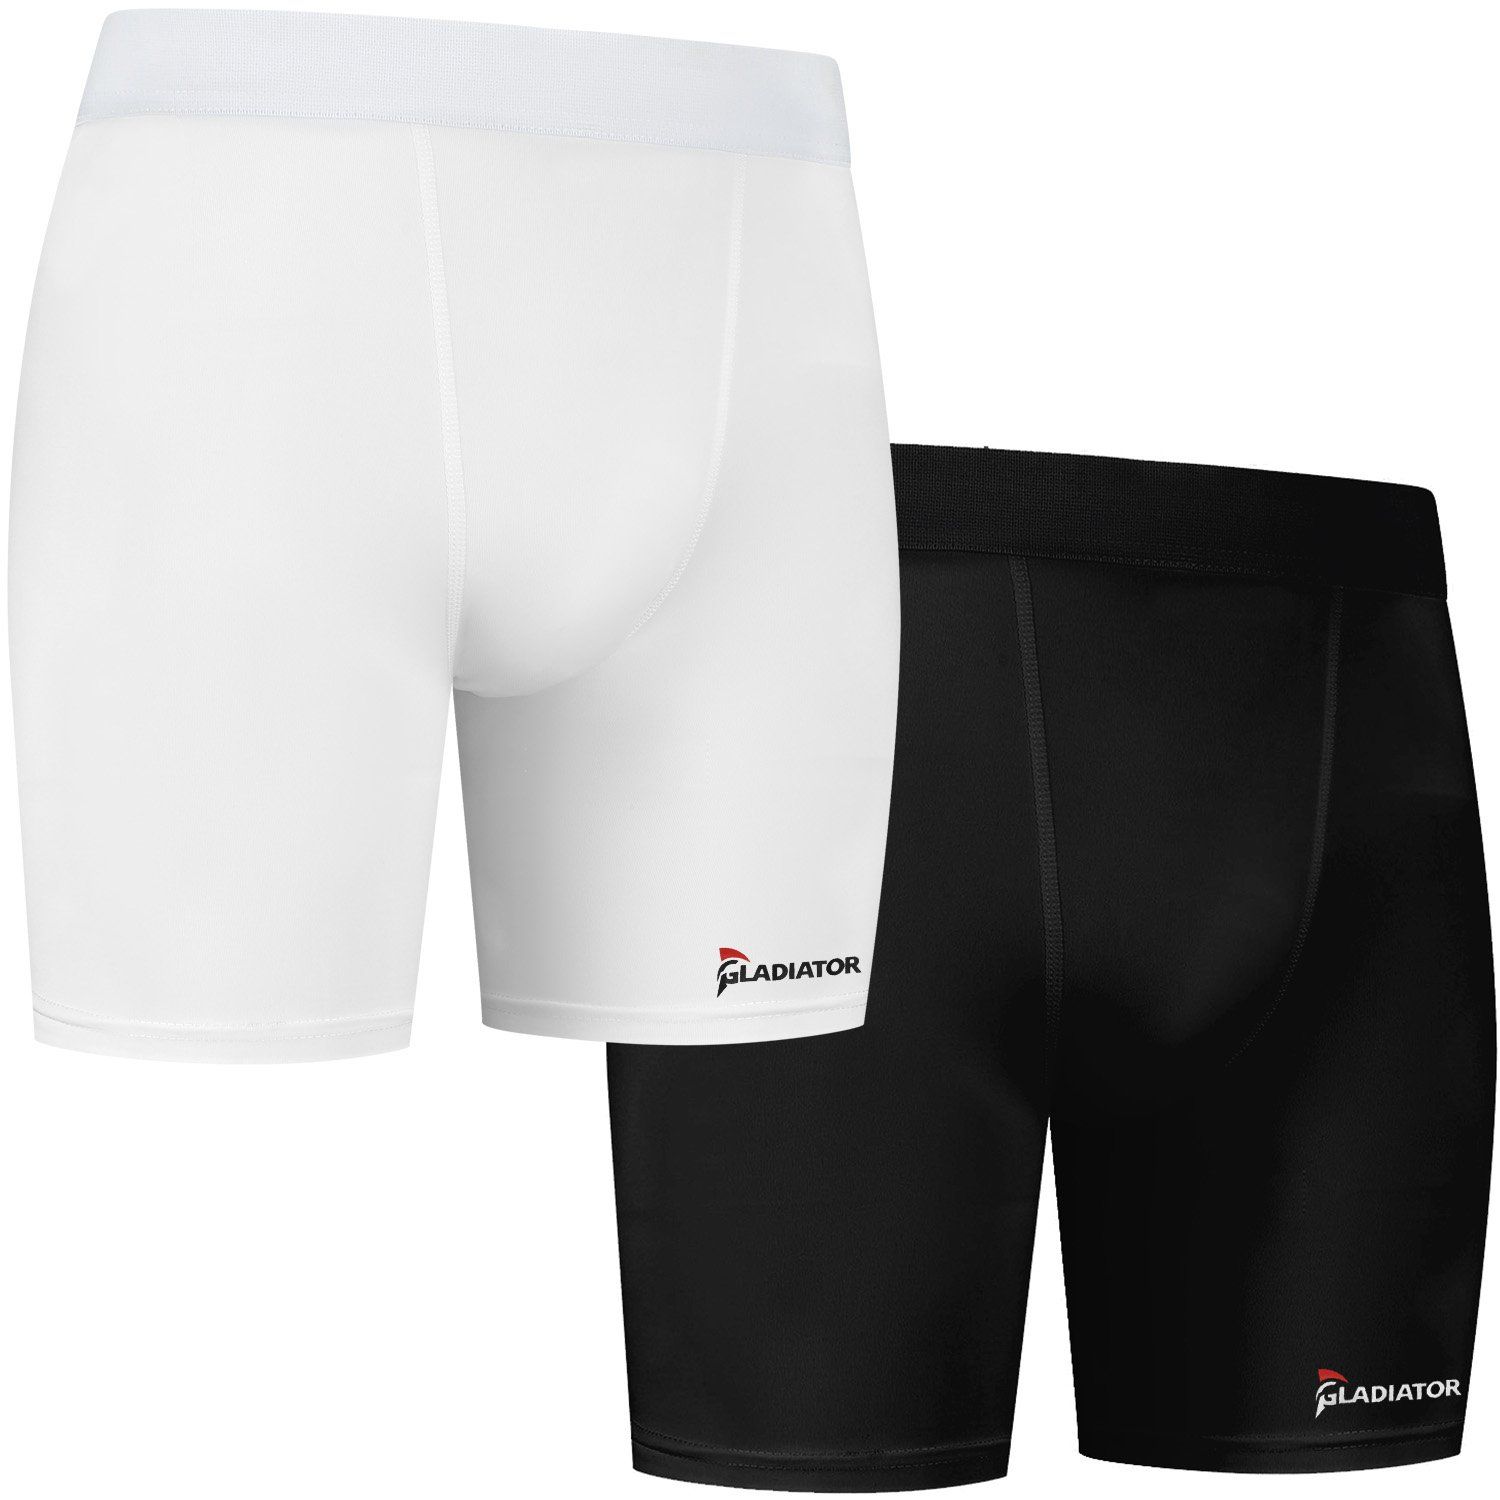 gladiator sports mens compression shorts in black and white 